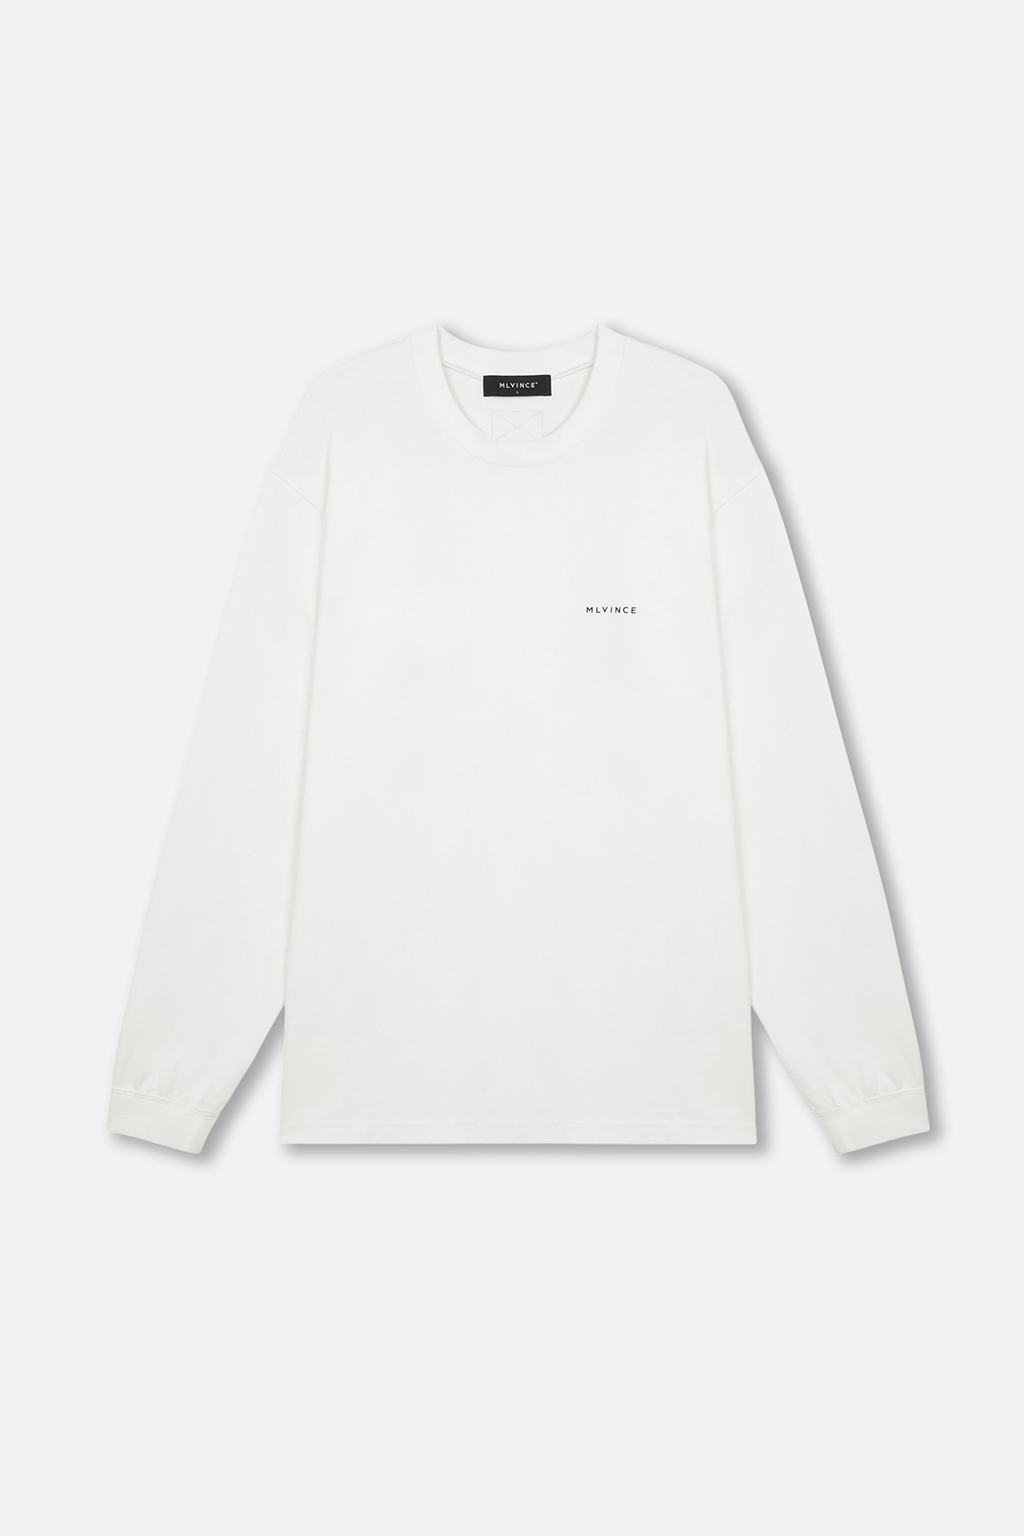 MLVINCE CLASSIC LOGO L S TEE WHITE